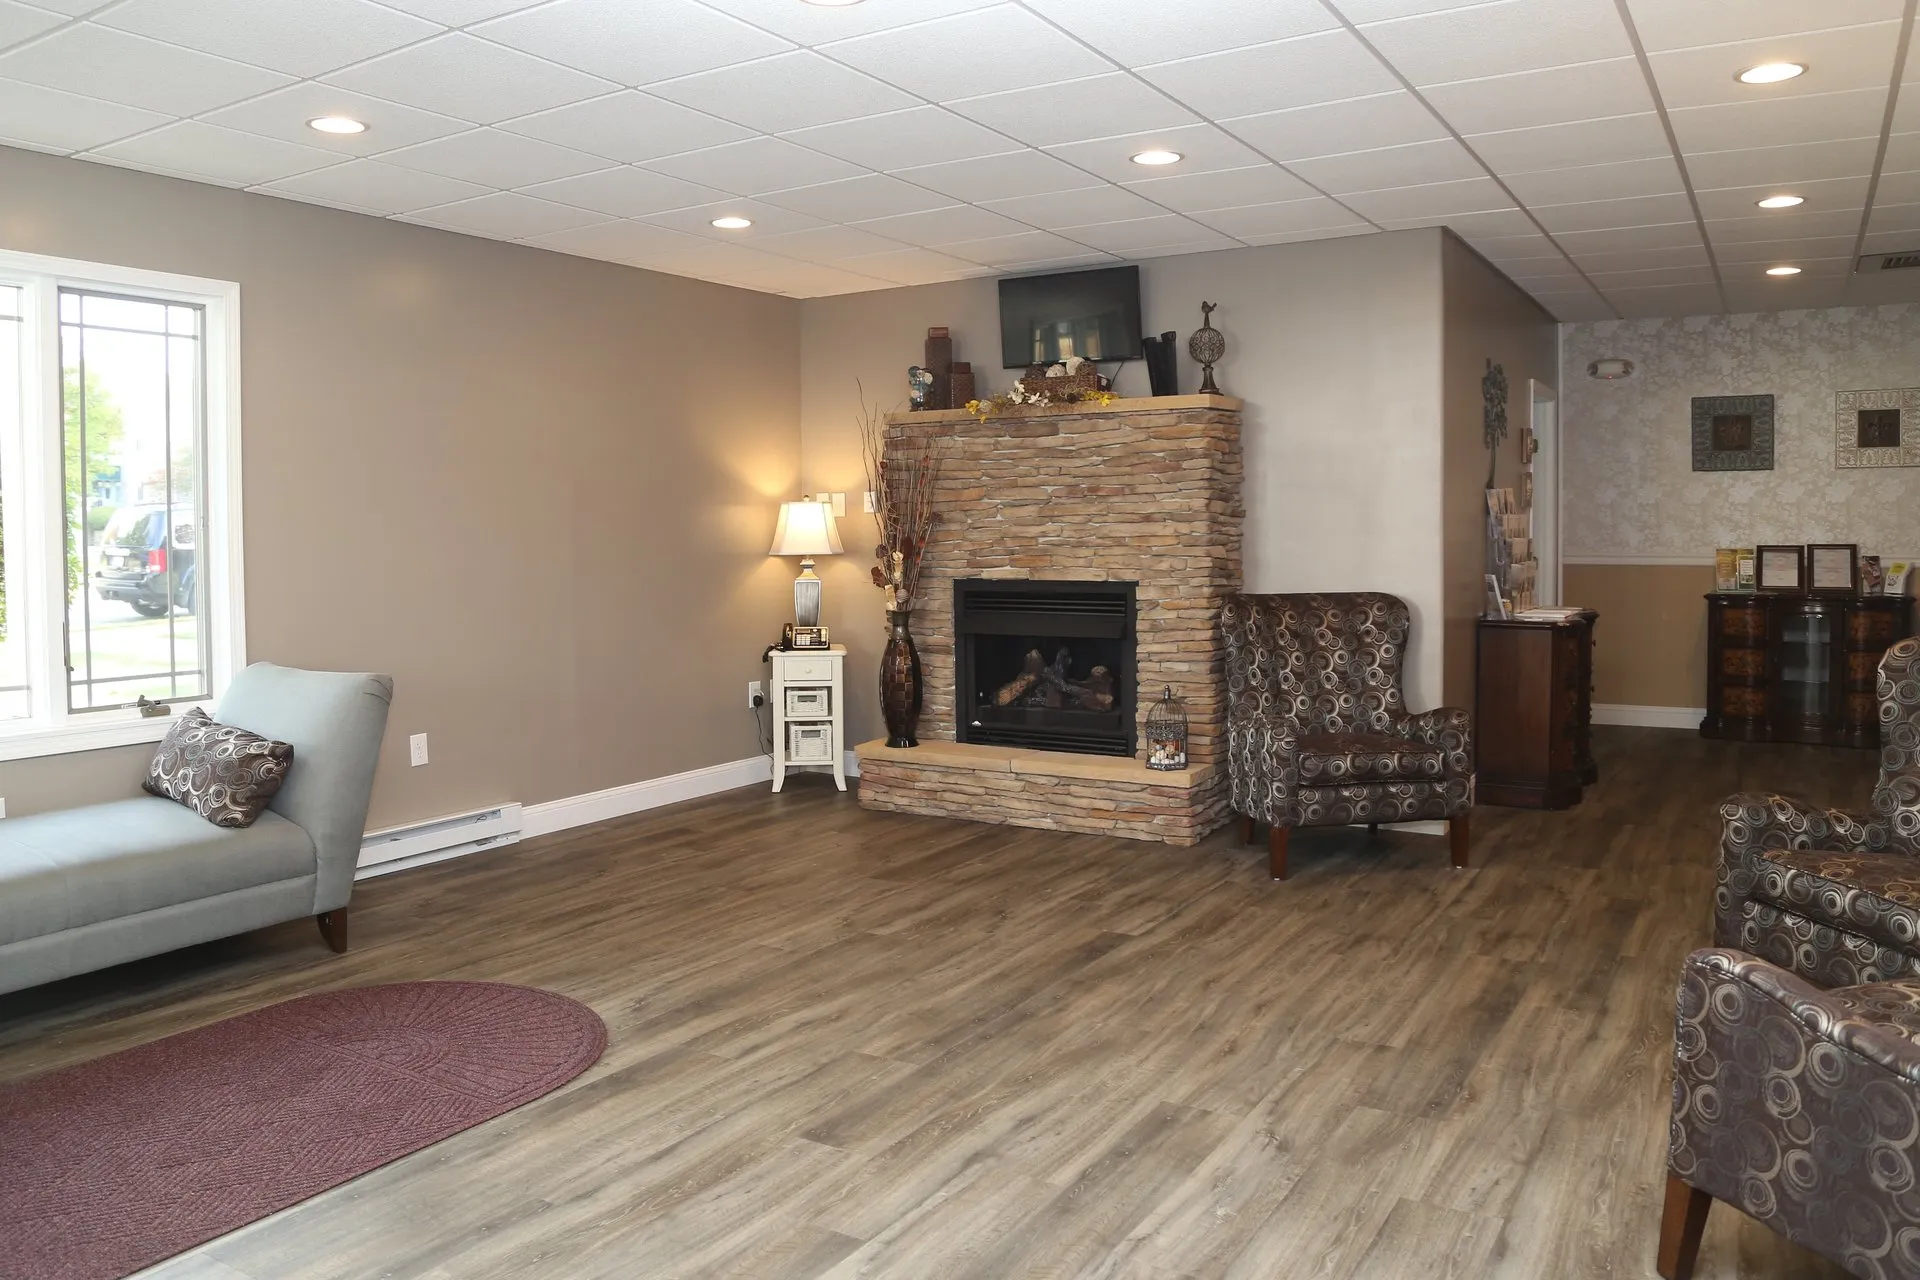 funeral home facilities room with fireplace and lit lamp at the corner